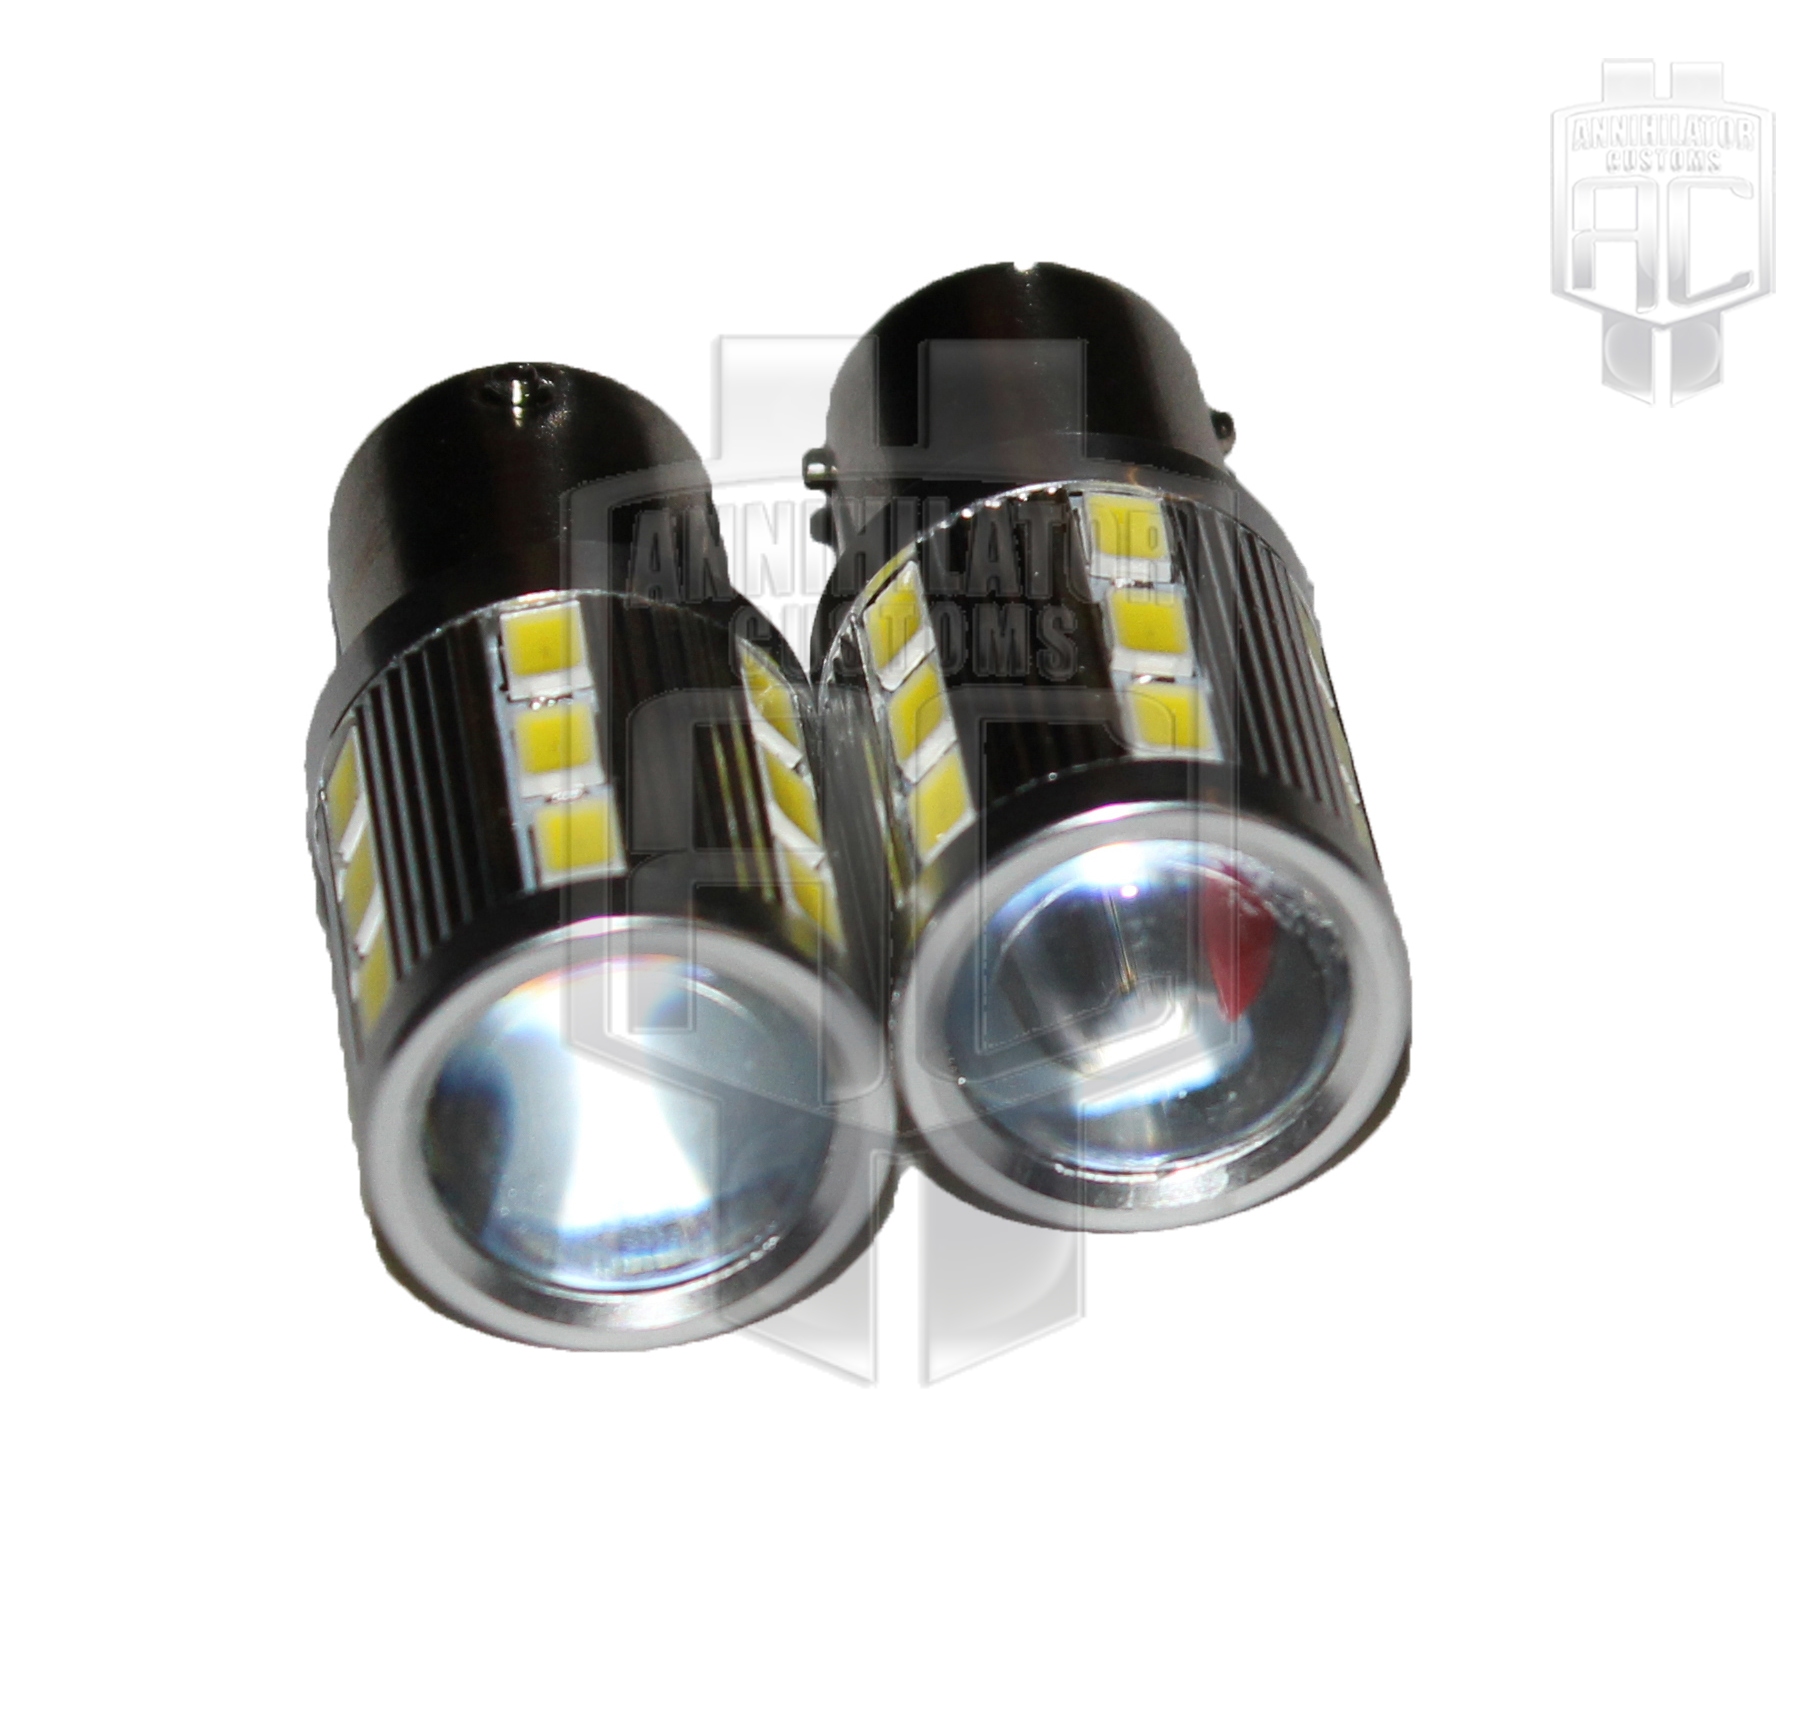 1156/BA15S 18pc 5630 SMDs and 1pc CREE LED Light Bulb in Lens